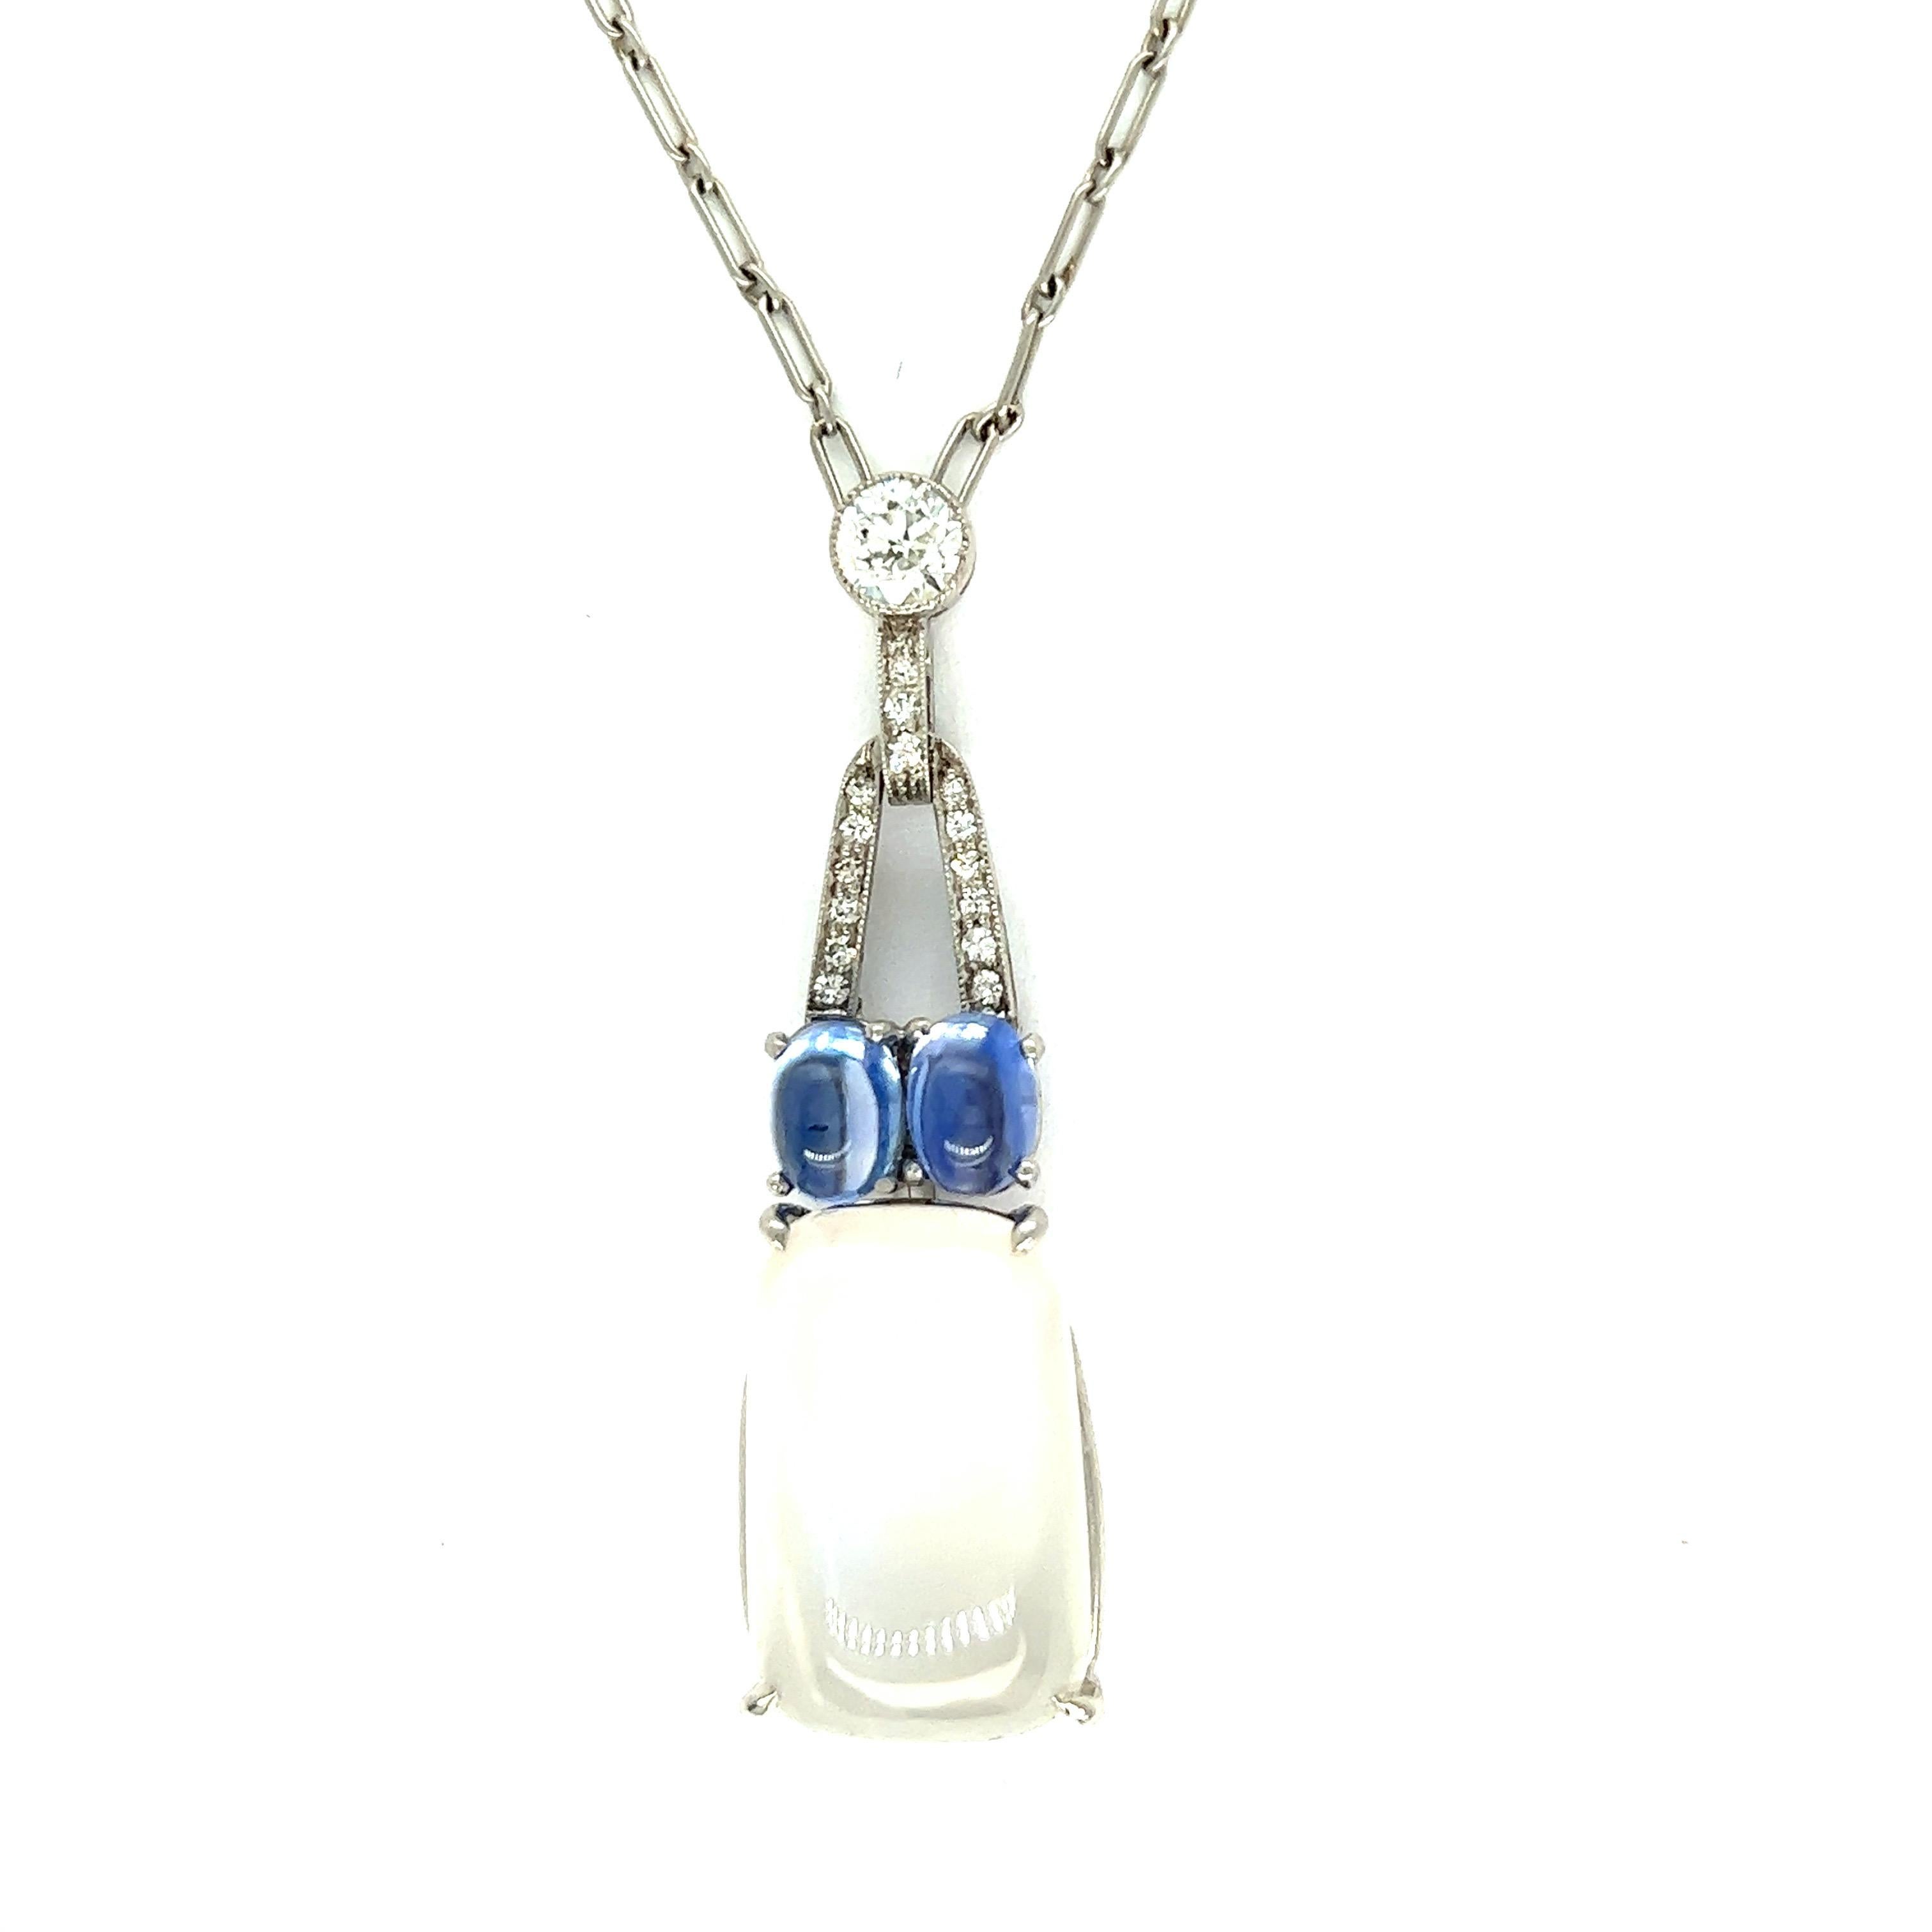 Art Deco Cabochon Moonstone Sapphire Pendant Necklace

Cabochon moonstone 17.5 x 11 x 5 mm, with two smaller cabochon sapphires, accented by single and old European-cut diamonds of approximately 0.25 carat; suspended from a fine link platinum